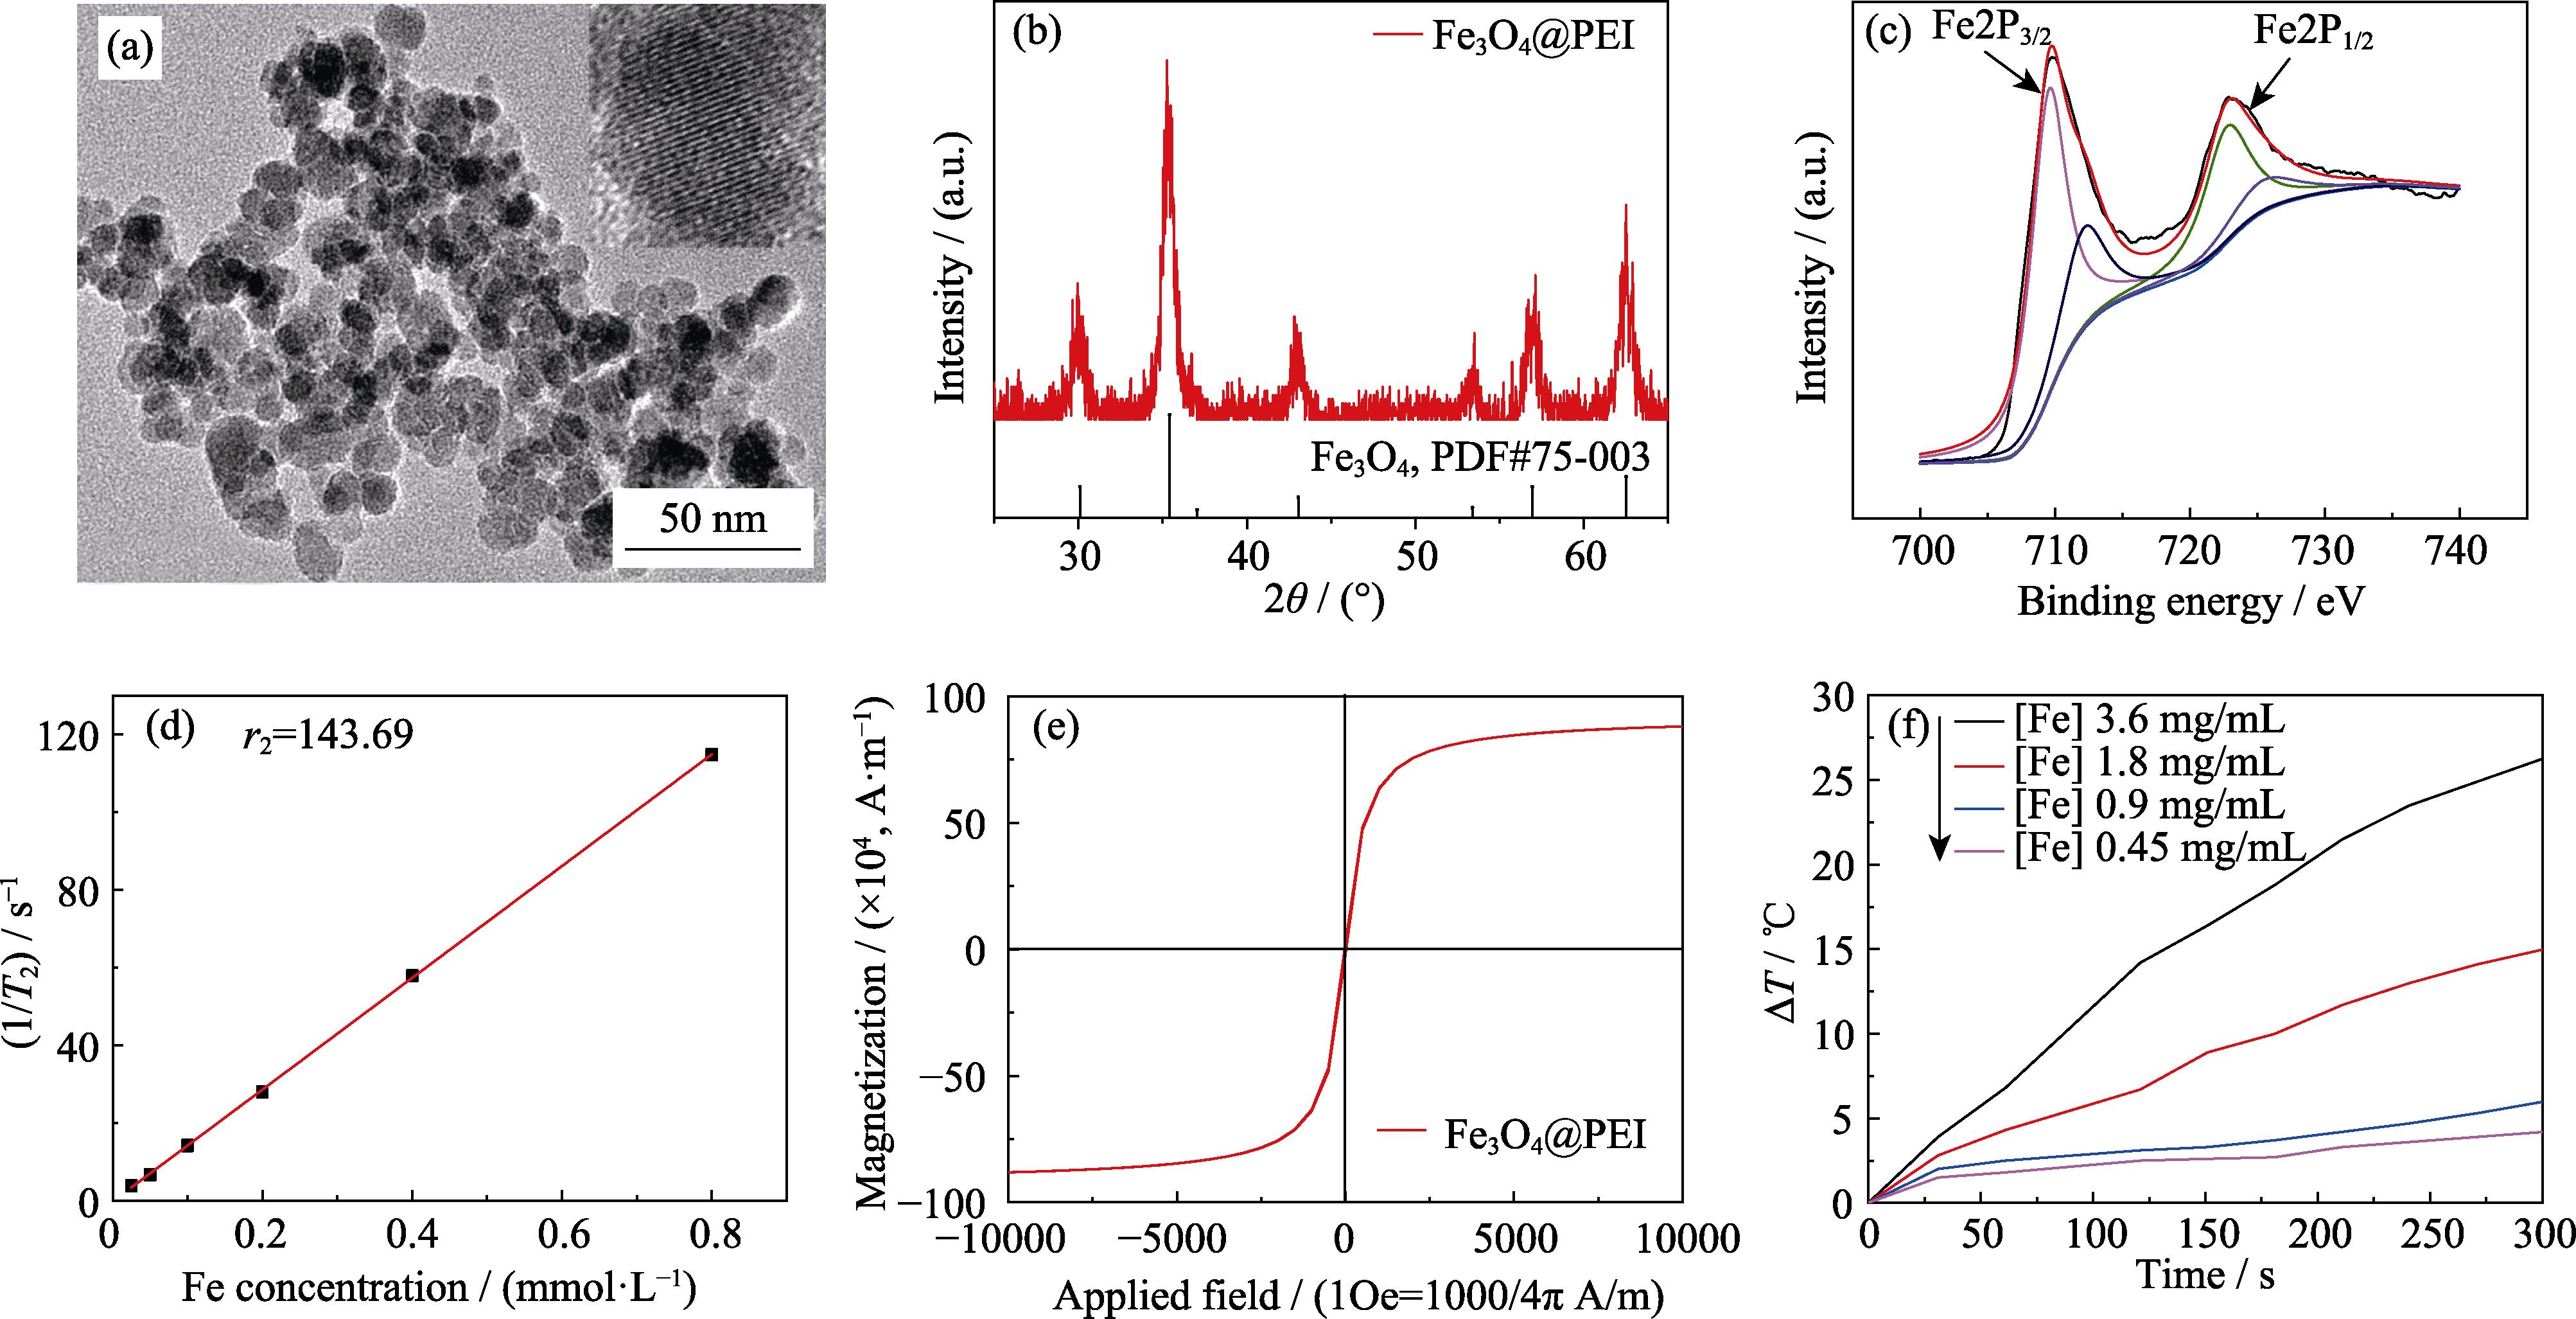 TEM images of superparamagnetic Fe3O4 nanoparticles (a), XRD patterns (b), XPS spectra (c), r2 relaxation rate (d),saturation magnetization (e), and temperature rise curves of different Fe concentrations in an alternating magnetic field (f)